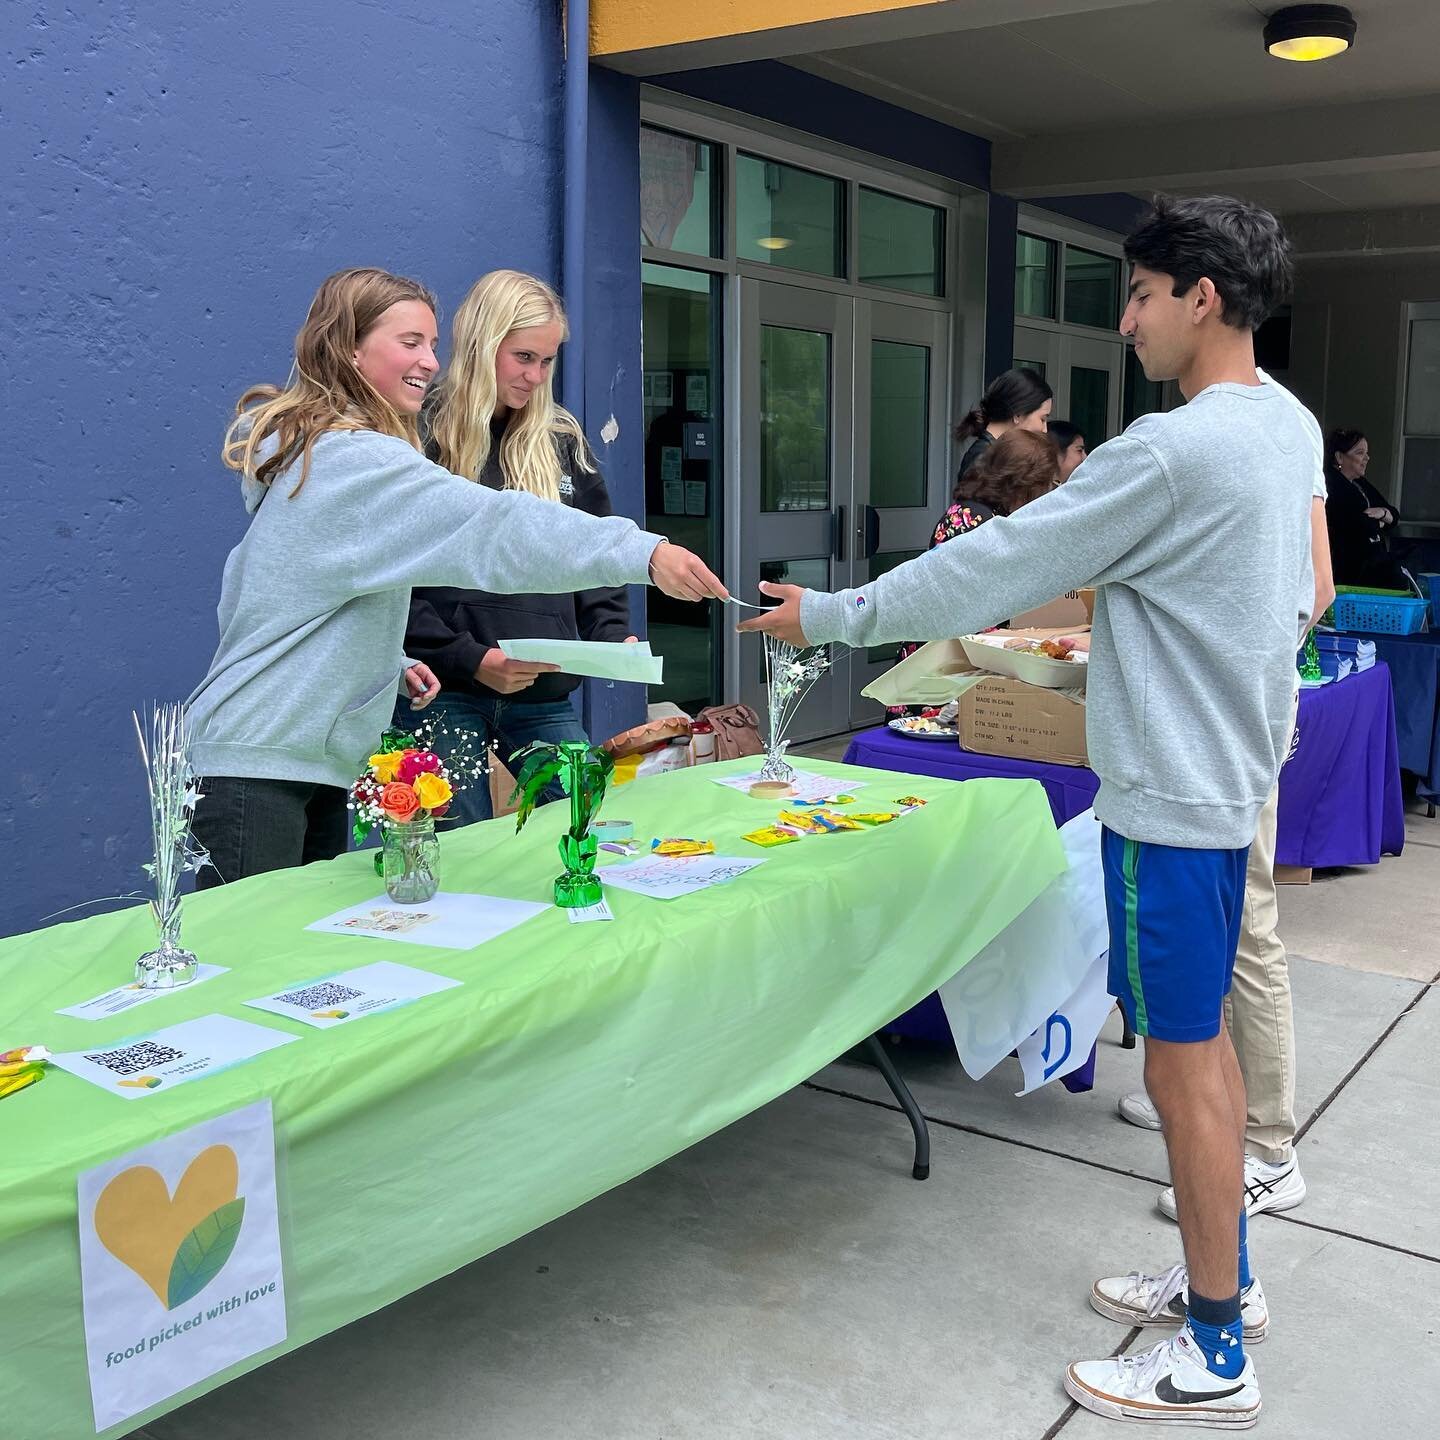 Today, two Food Picked with Love leaders helped to educate other teens and adults about food waste and food insecurity, handing out flyers and talking about ways to help. Thanks to @mizzram4youth for coordinating the event! Sign the Food Waste Pledge